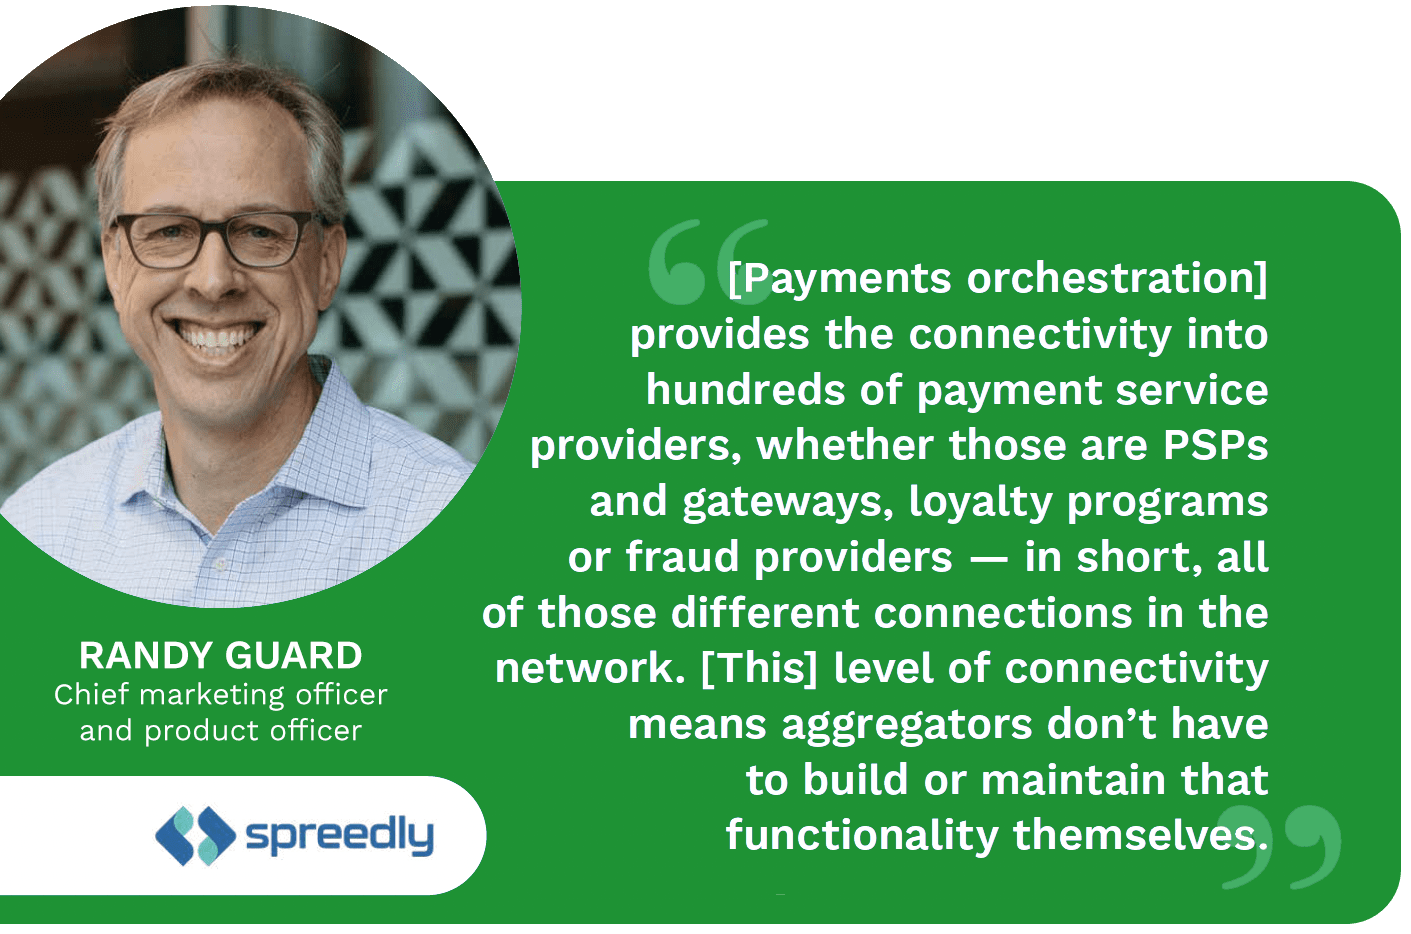 PYMNTS interviews Randy Guard, chief marketing officer and product officer at Spreedly, about why marketplaces or aggregators need payments orchestration solutions to provide the best value for their merchant partners.